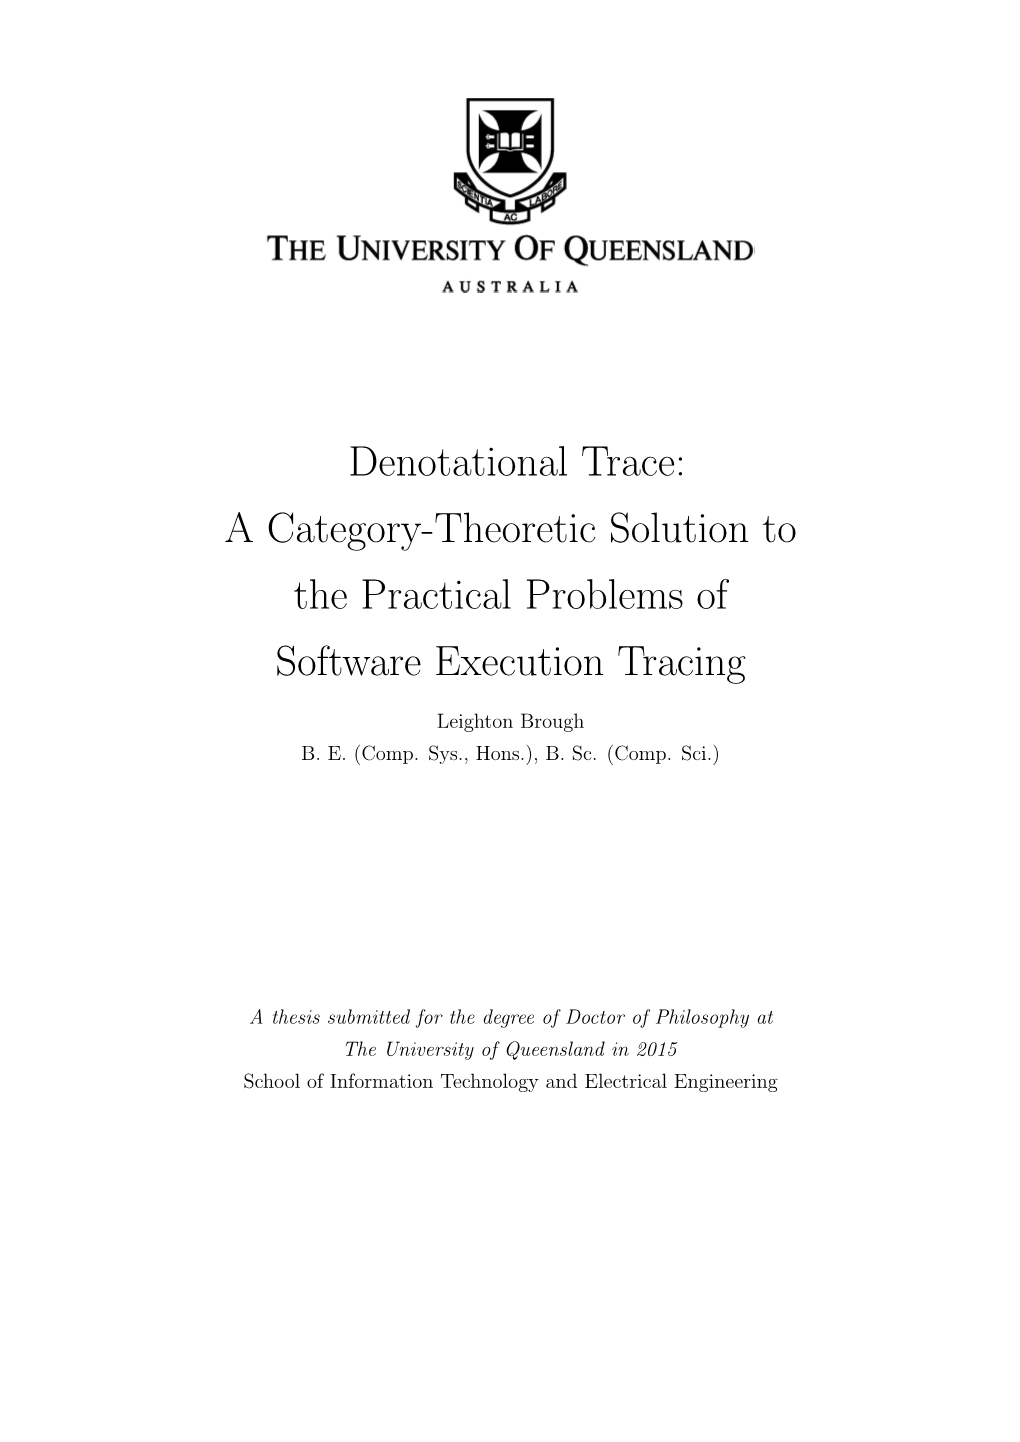 Denotational Trace: a Category-Theoretic Solution to the Practical Problems of Software Execution Tracing